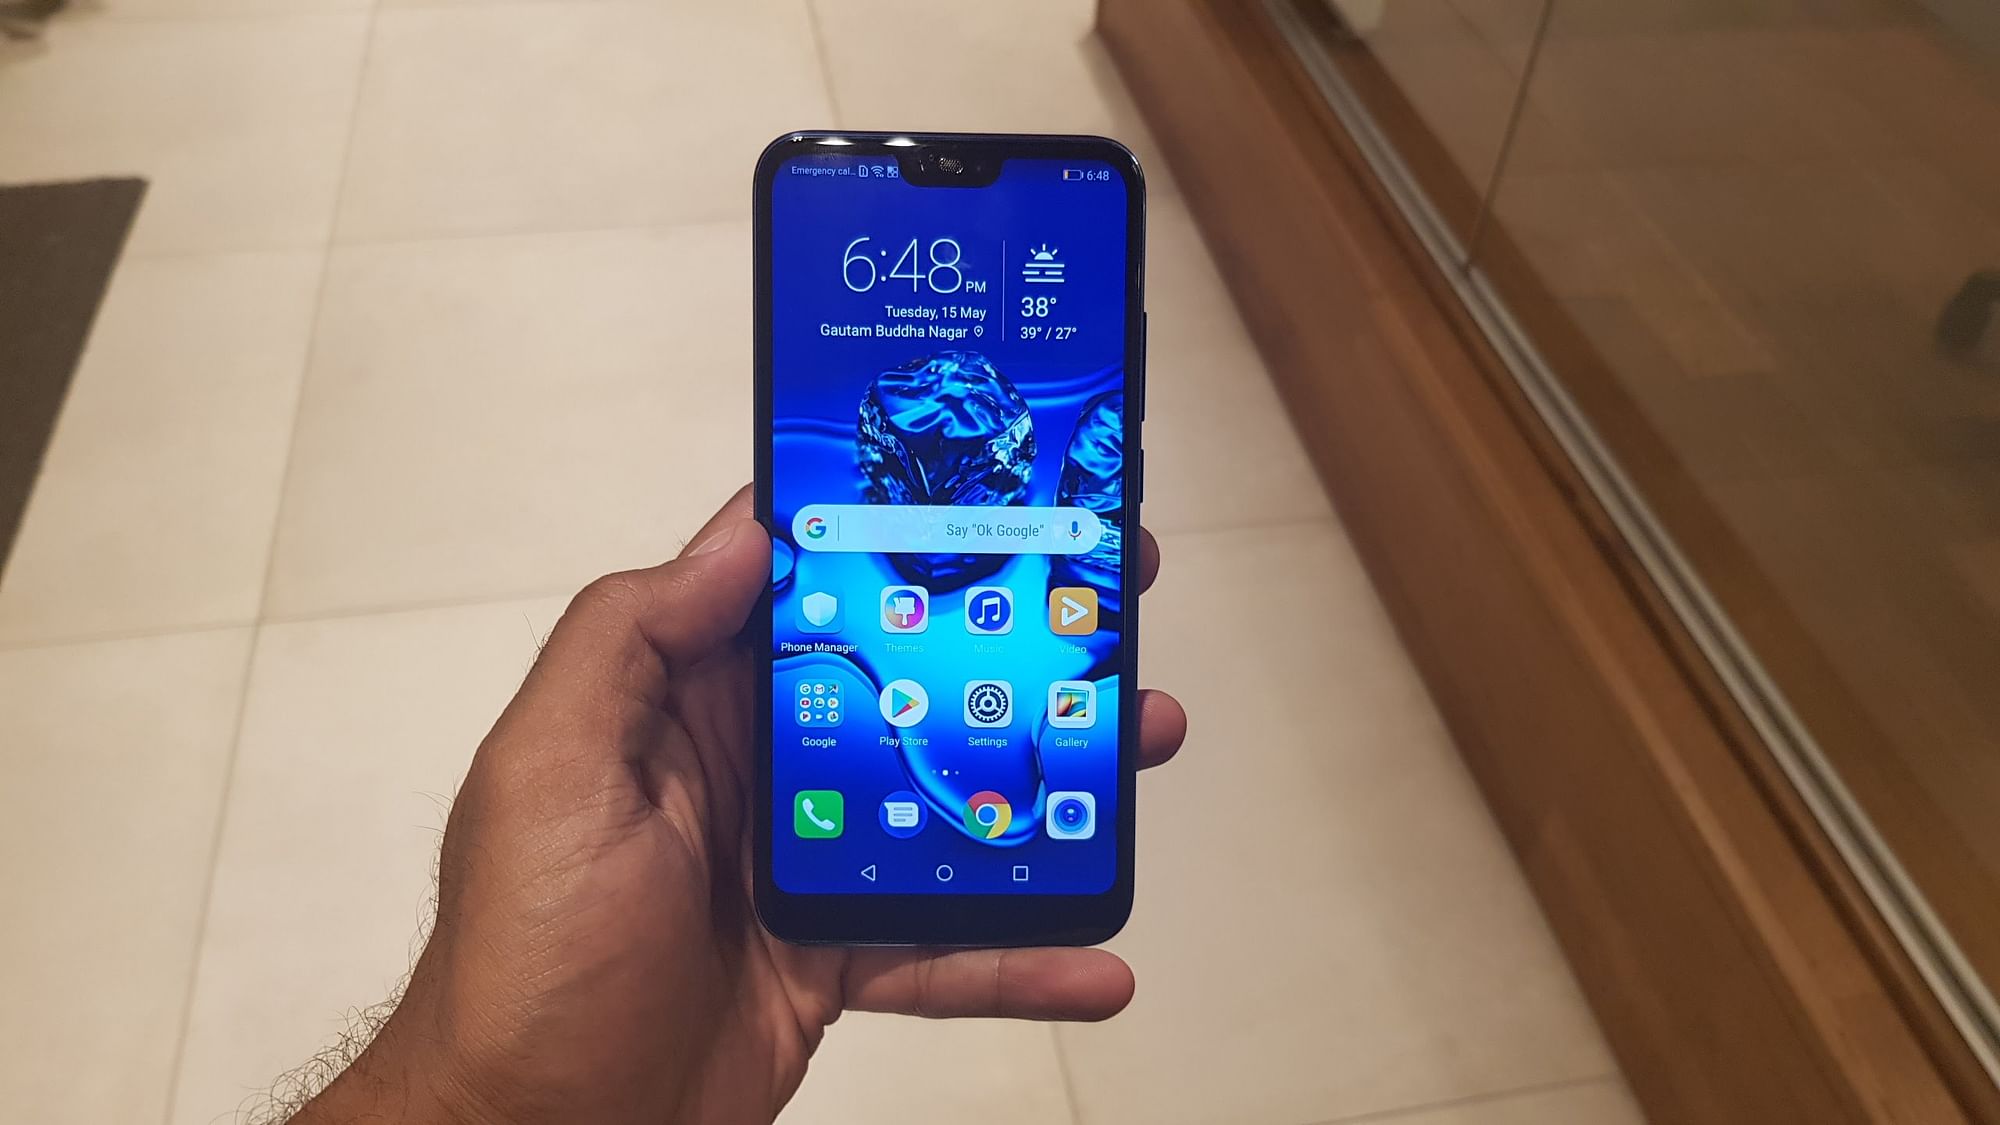 The Honor 10 comes with 6GB RAM